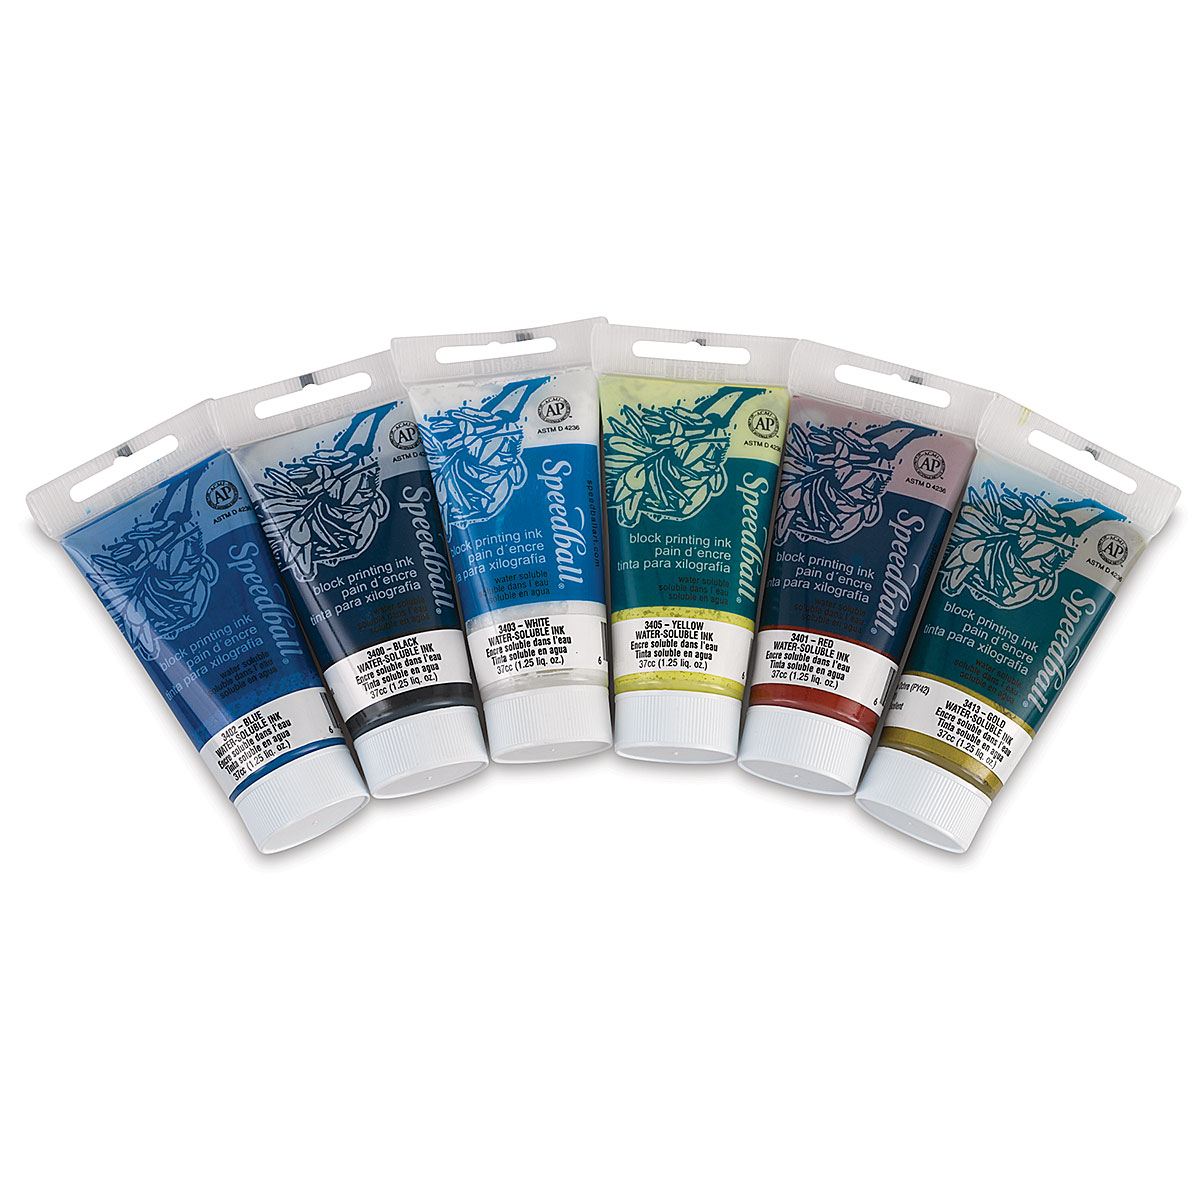 Nasco Water-Soluble Block Printing Ink 16-Ounce each CHOICE OF COLOR